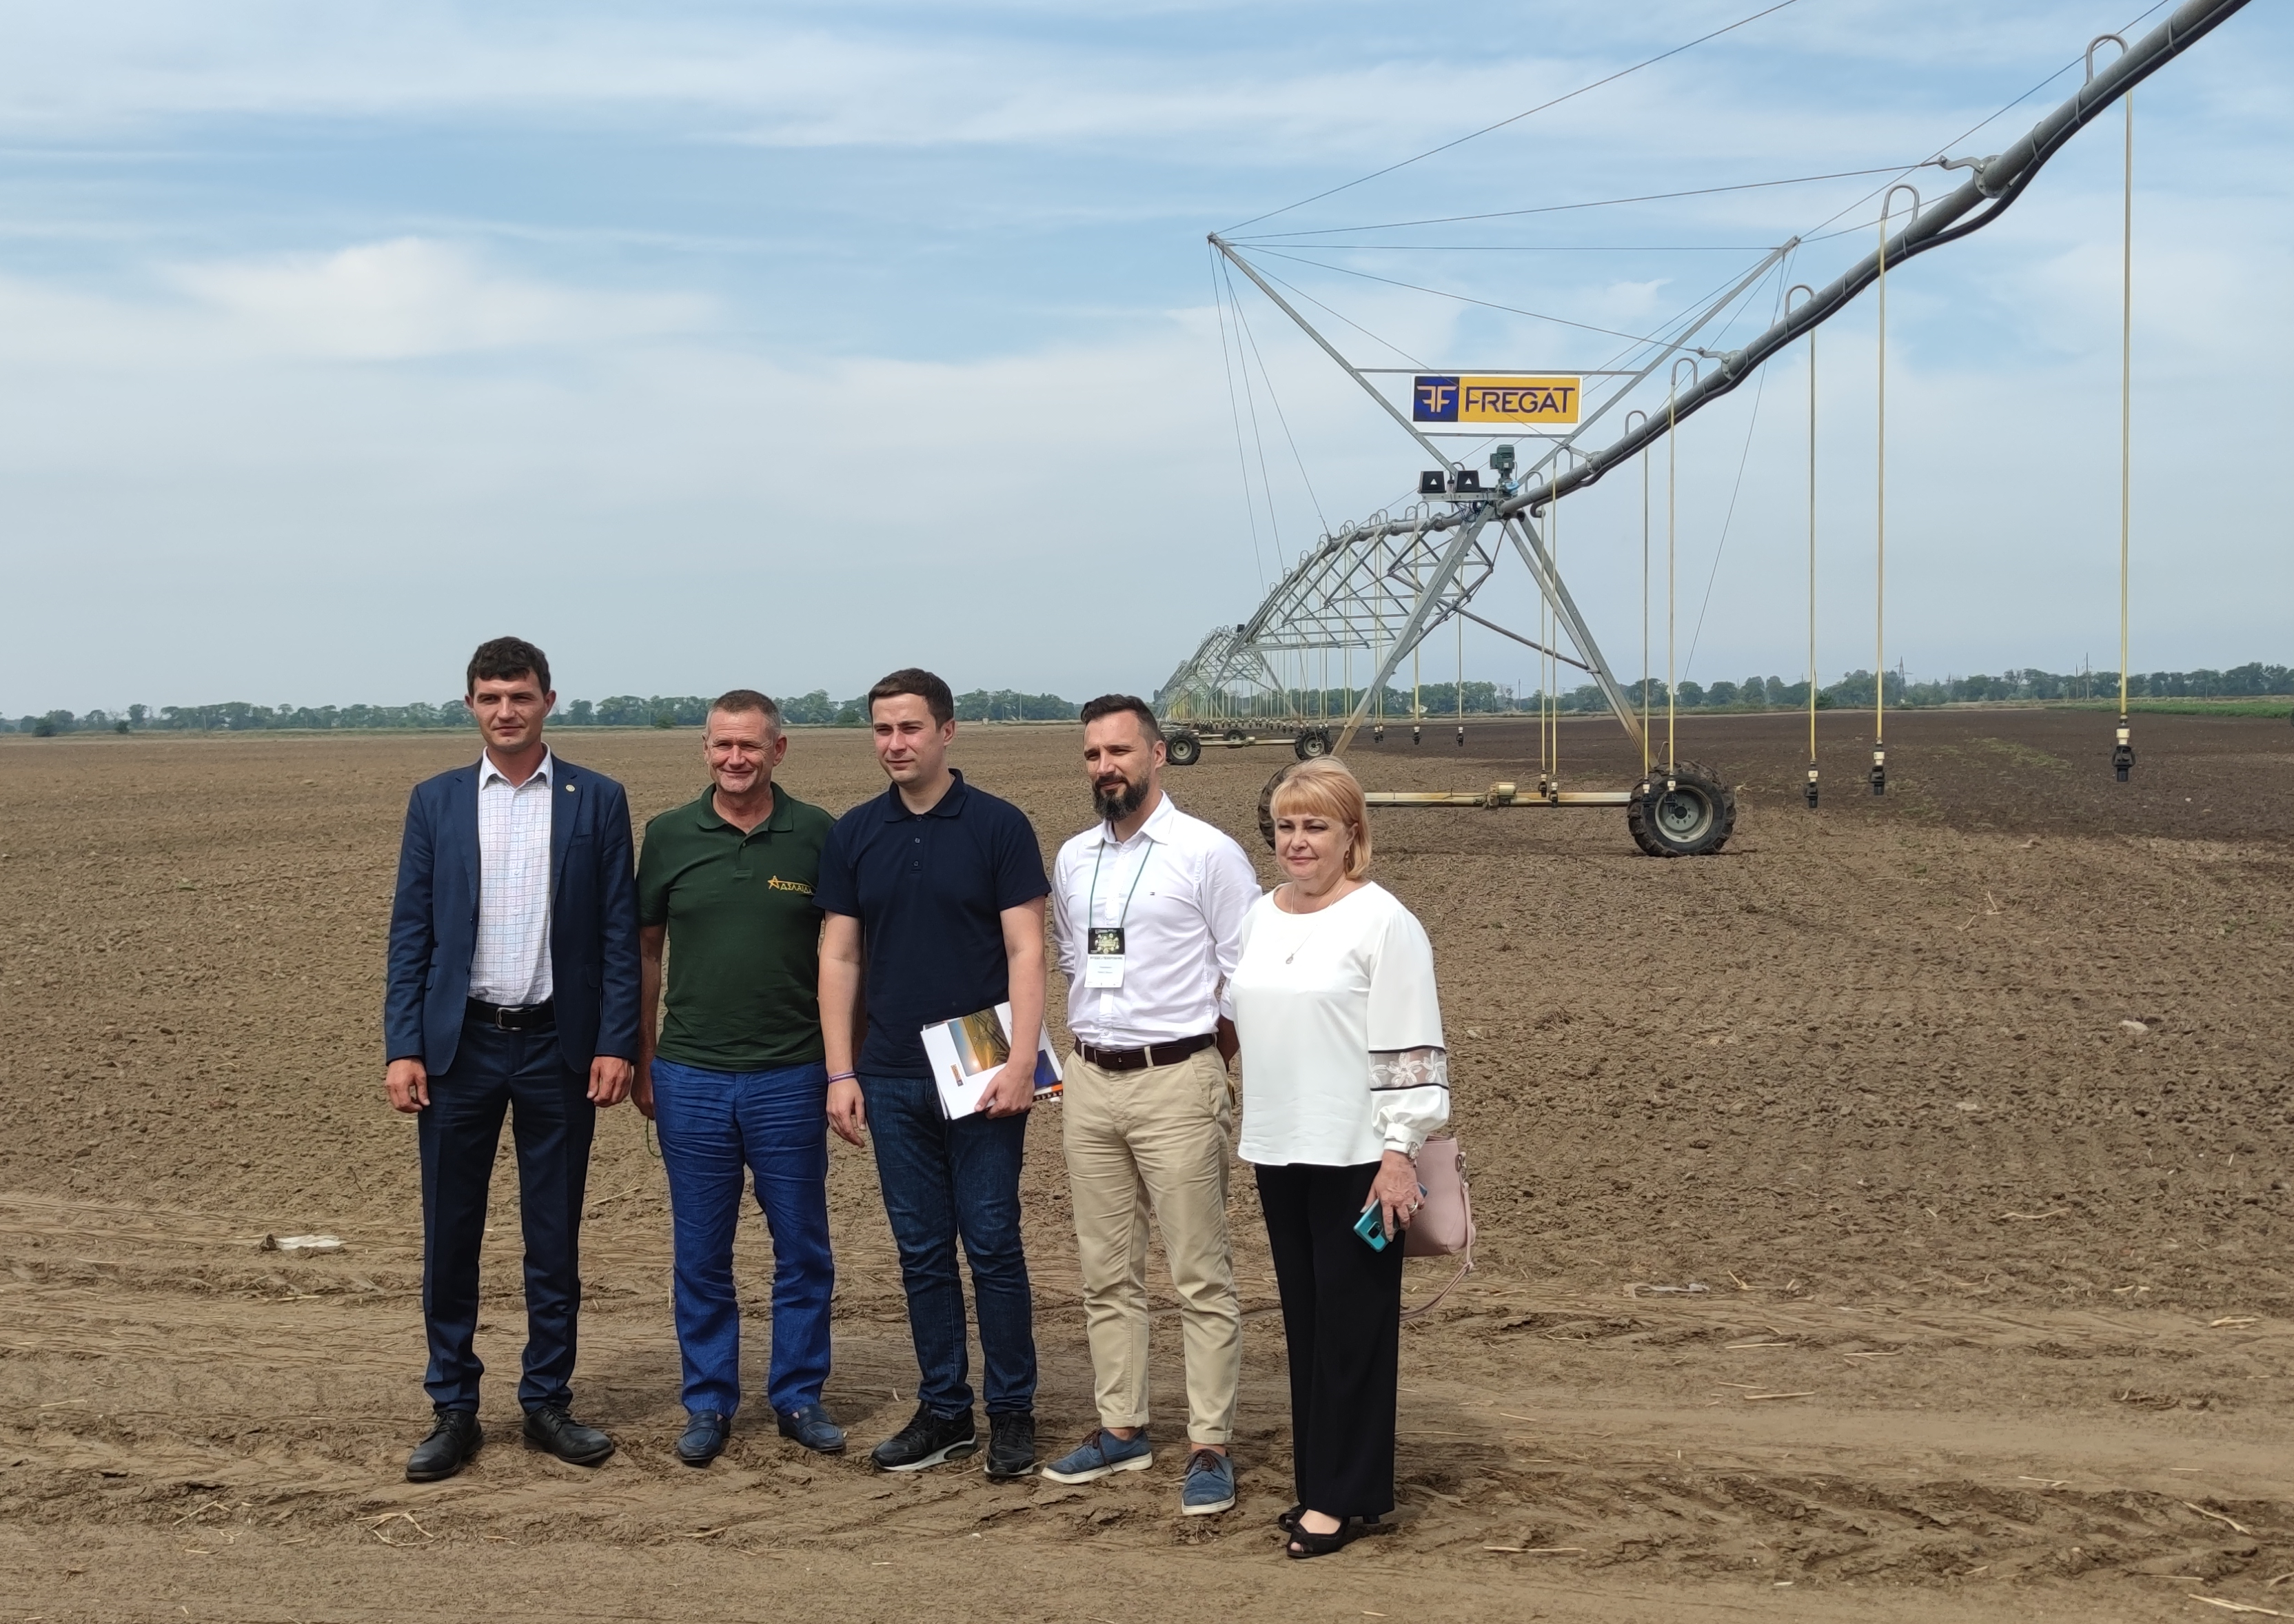 Ukrainian Minister of Agrarian Policy Roman Leshchenko set going the Irrigation Machine «Fregat» from his smartphone!